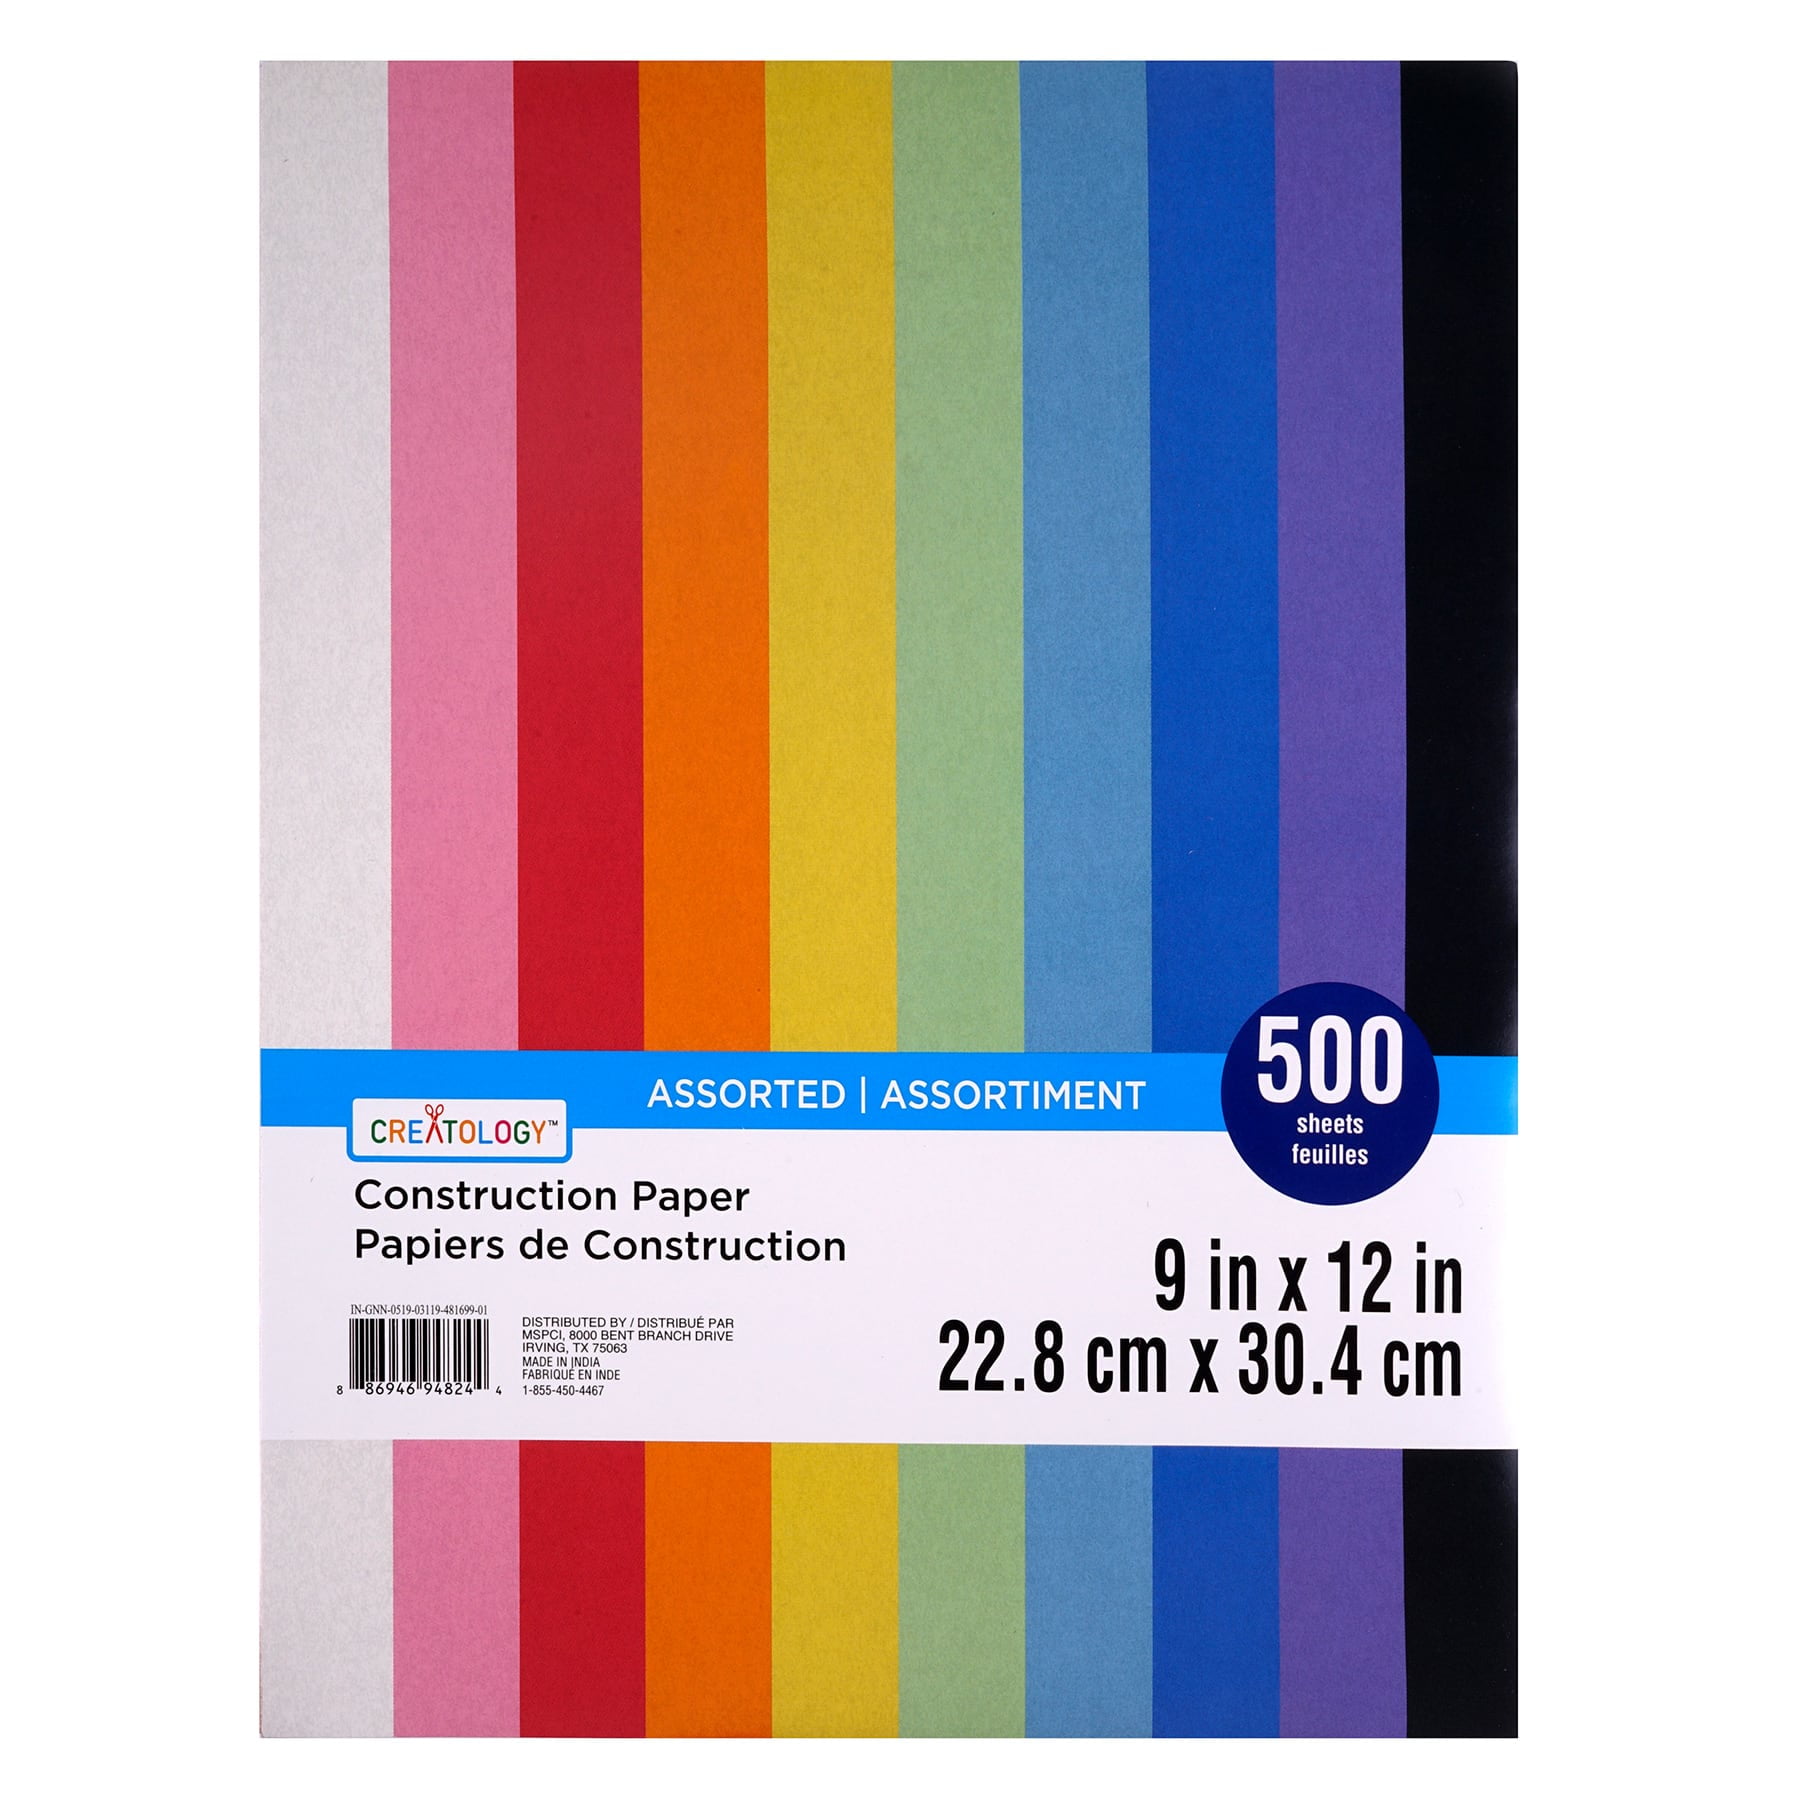 6555 Rainbow Super Value Construction Paper Ream 500 Sheets Pacon 9-Inches x 12-Inches Assorted 